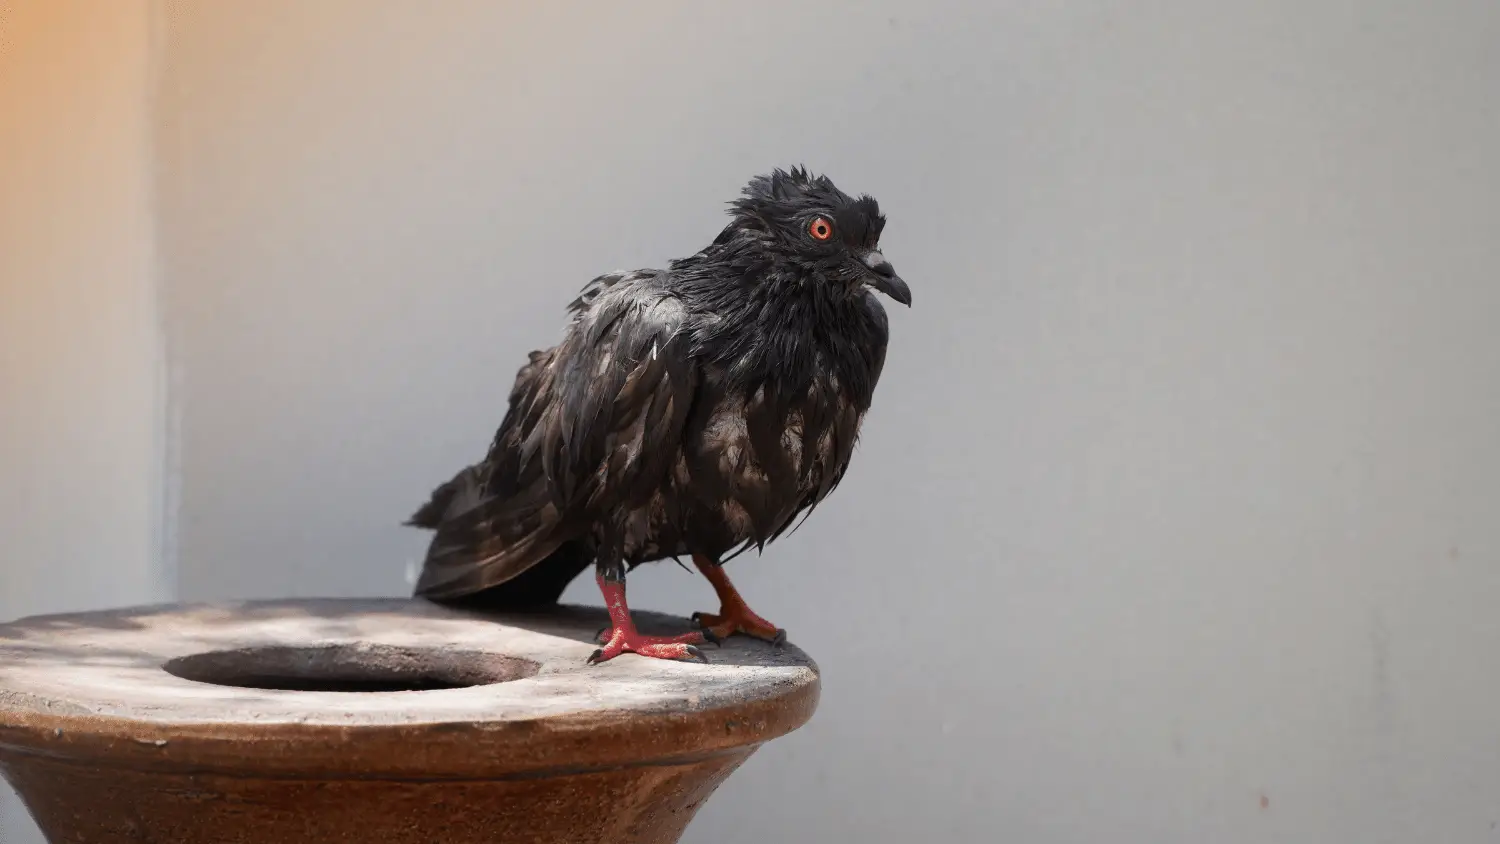 Pigeon Diseases to Humans